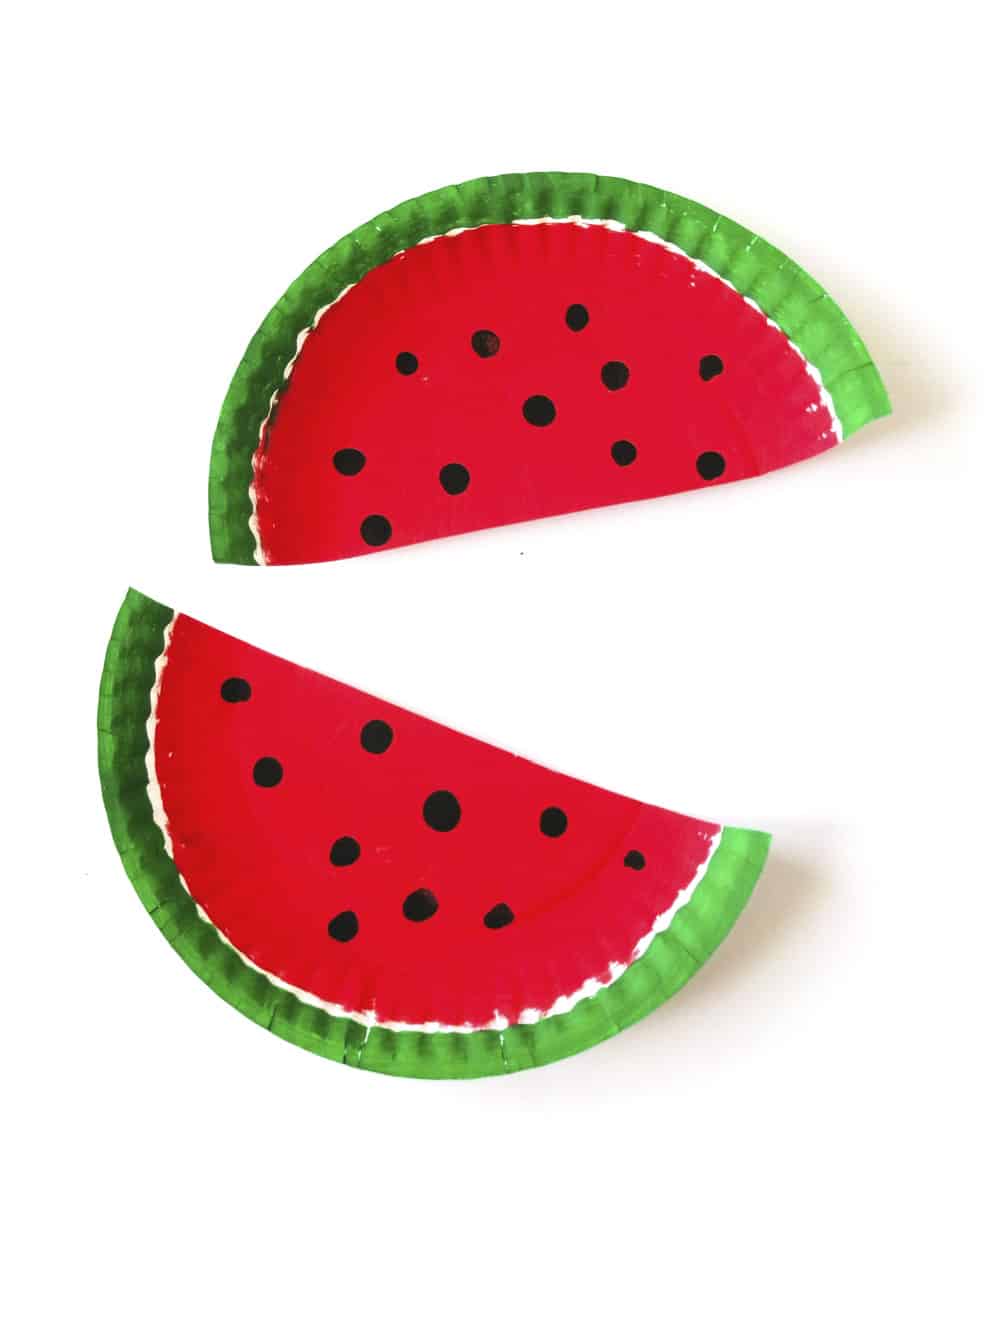 watermelon crafts for summer